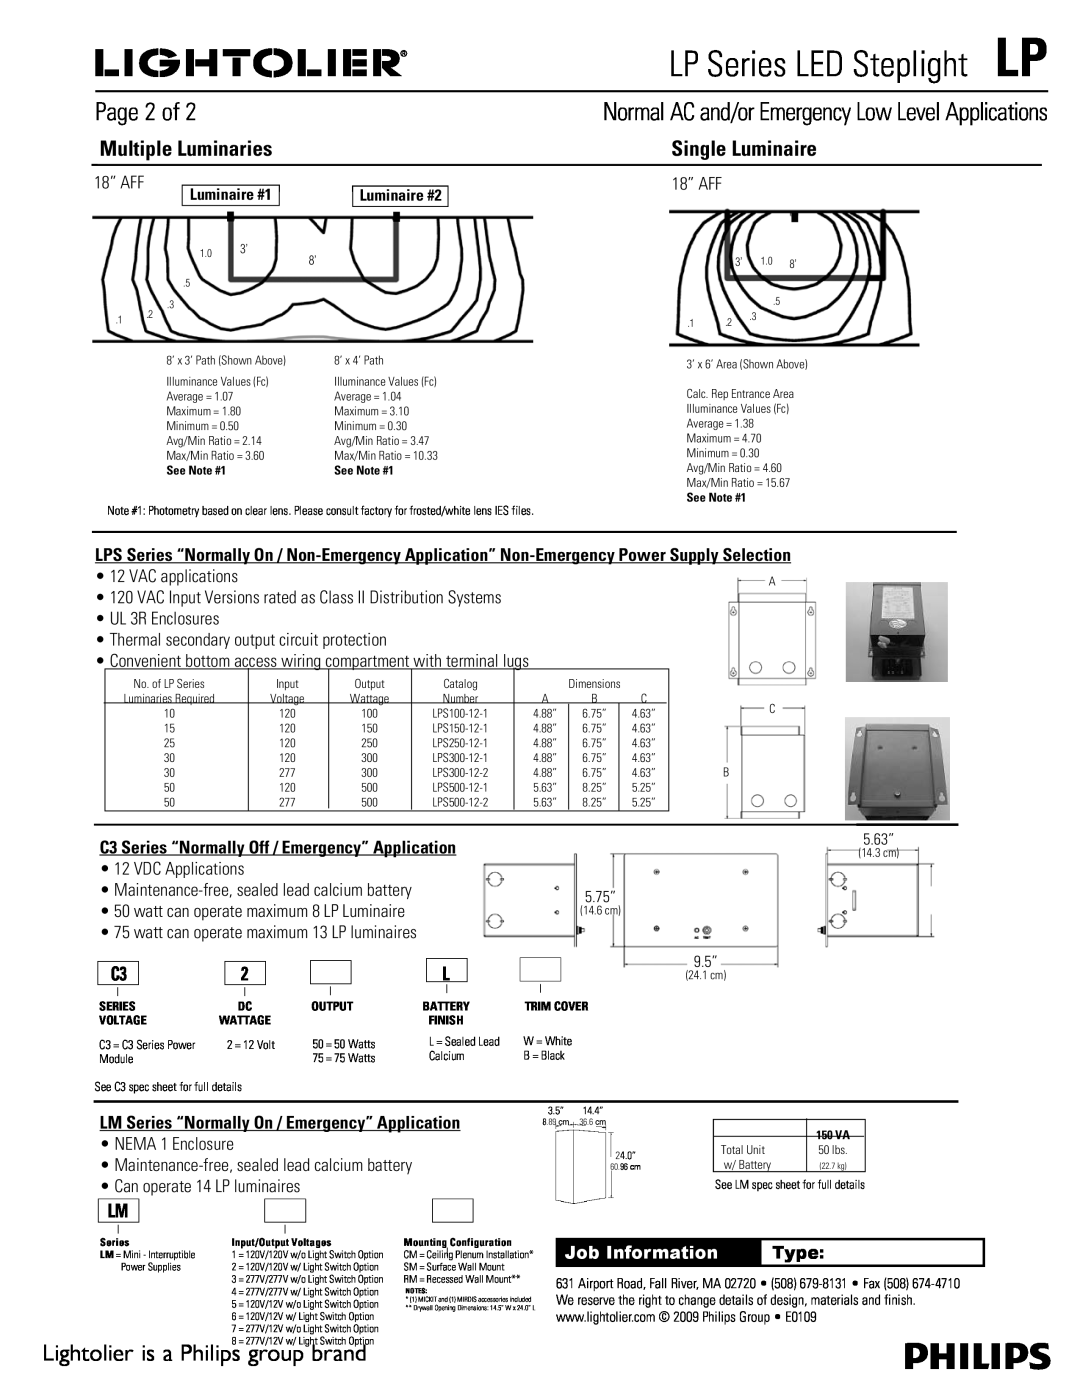 Lightolier LP Series Job Information Type, LP Series LED SteplightLP, Page 2 of, Lightolier is a Philips group brand 